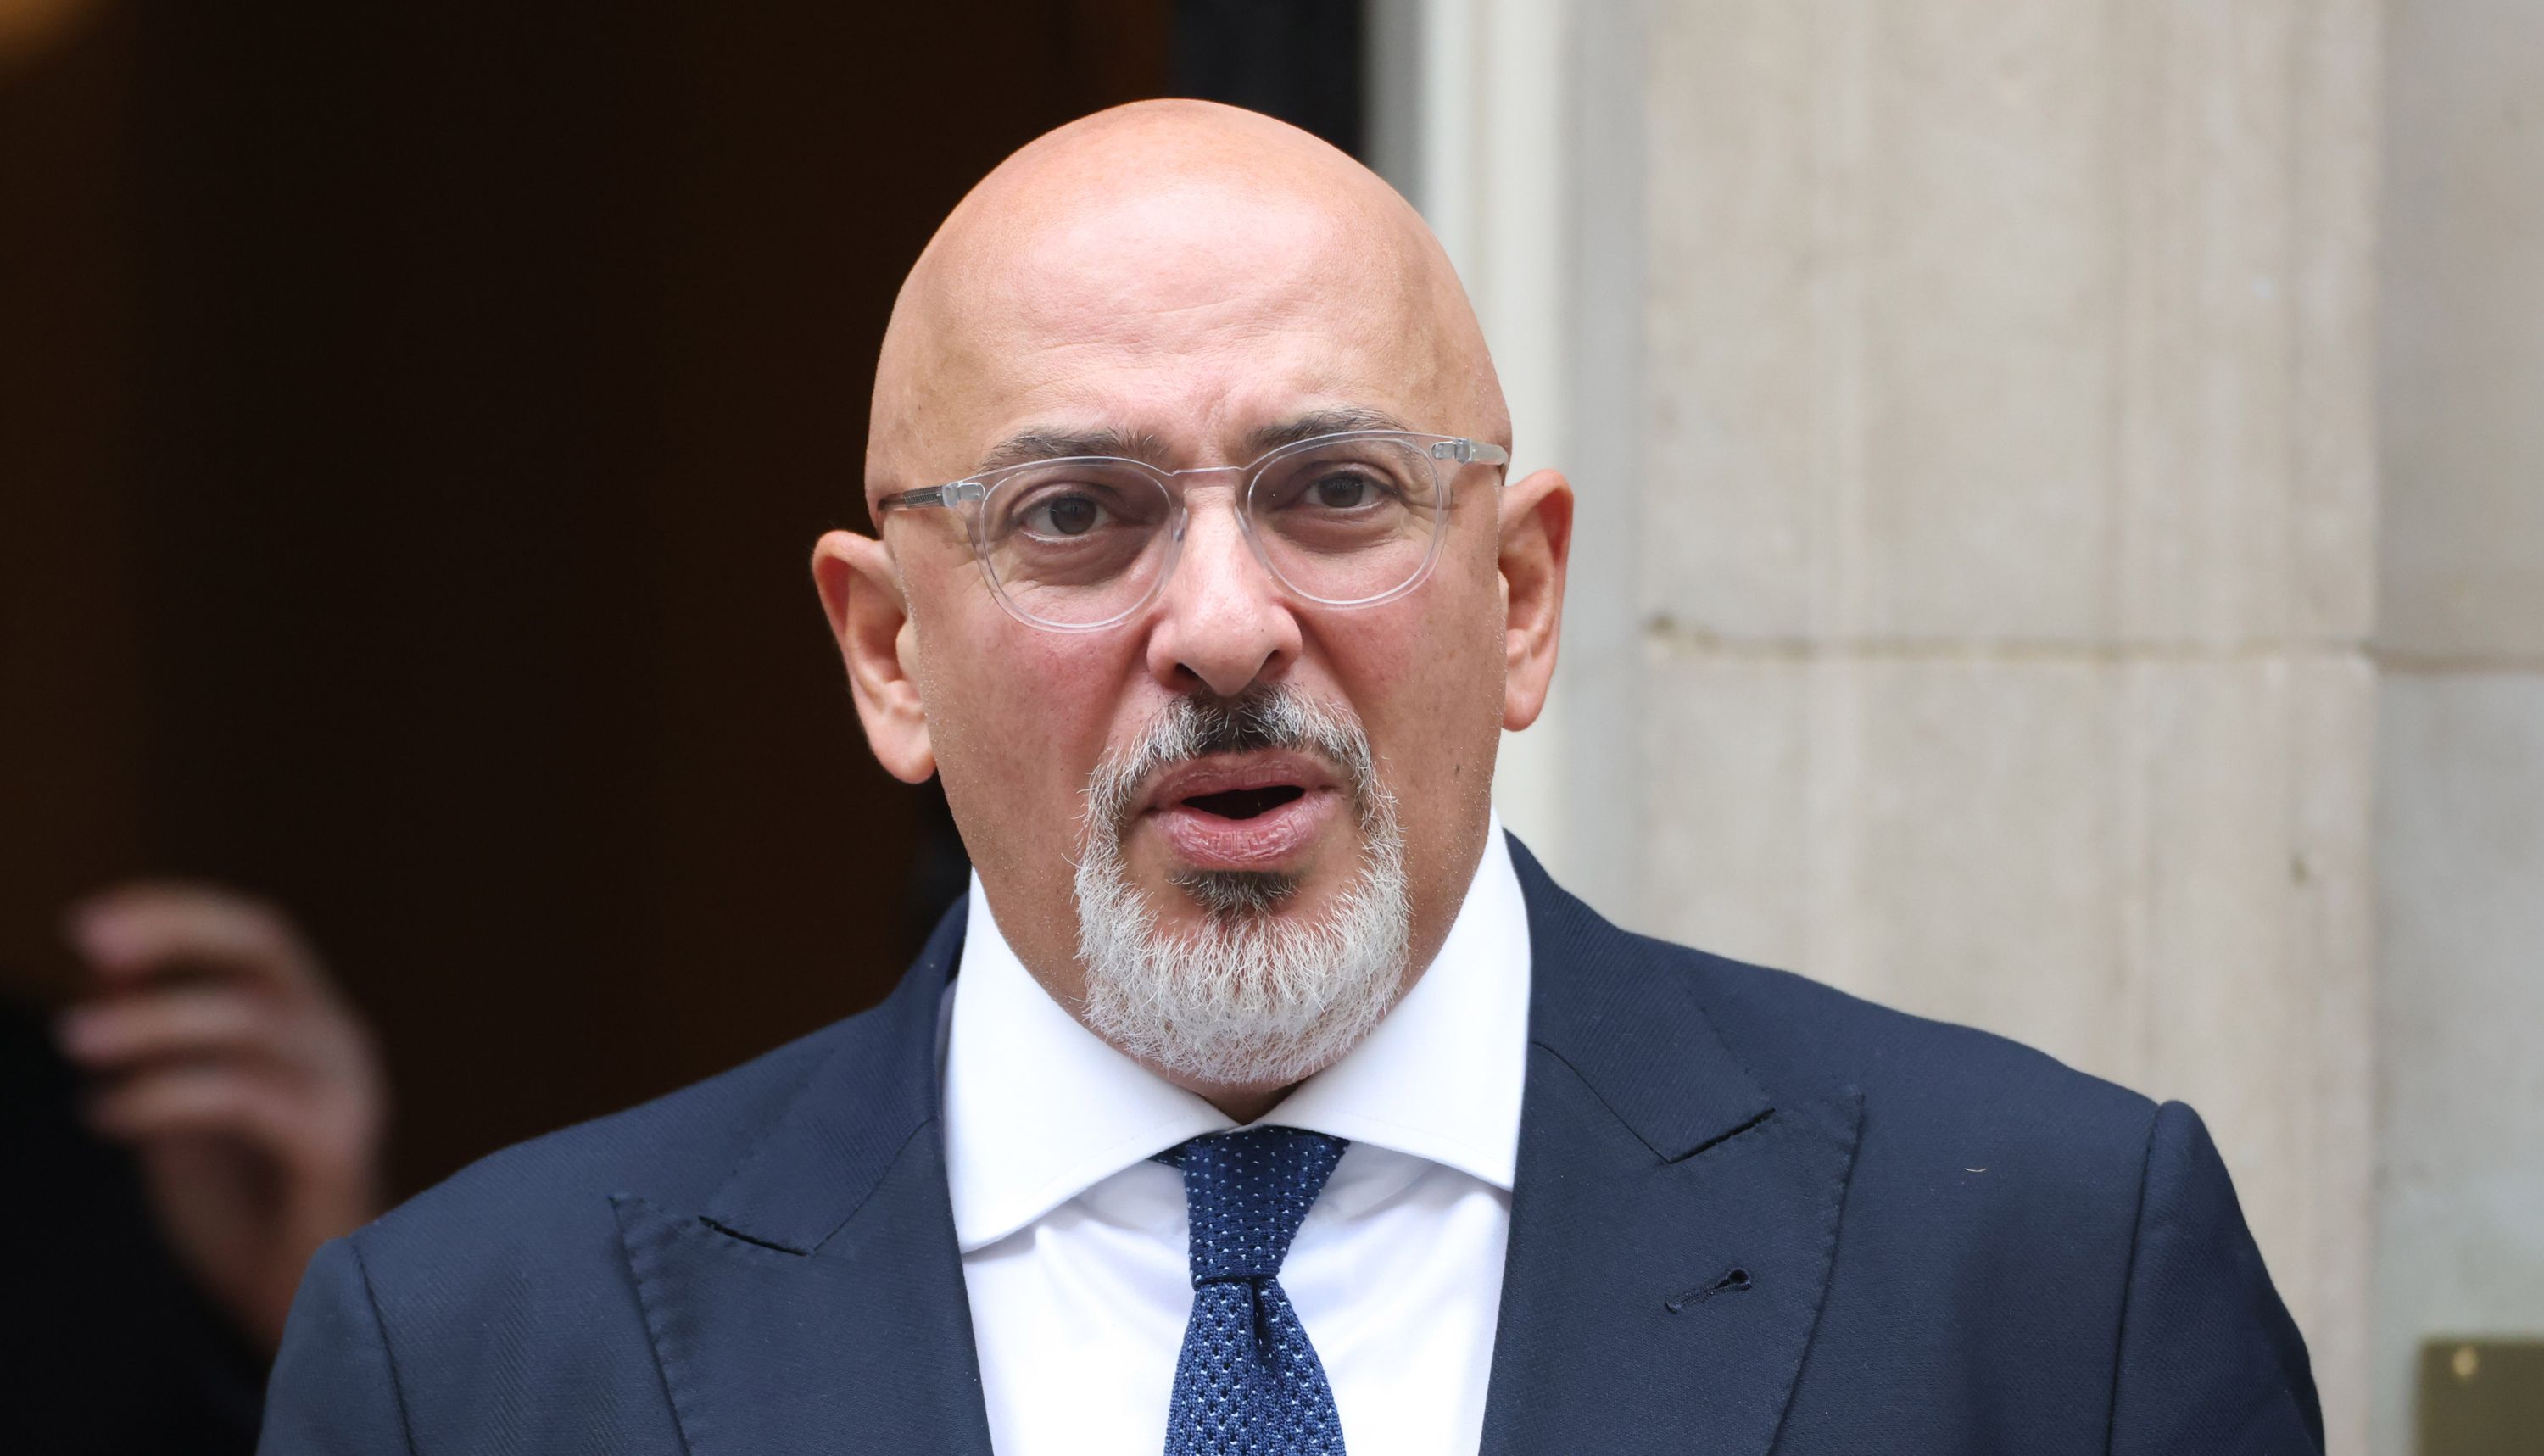 Nadhim Zahawi was eliminated from the campaign